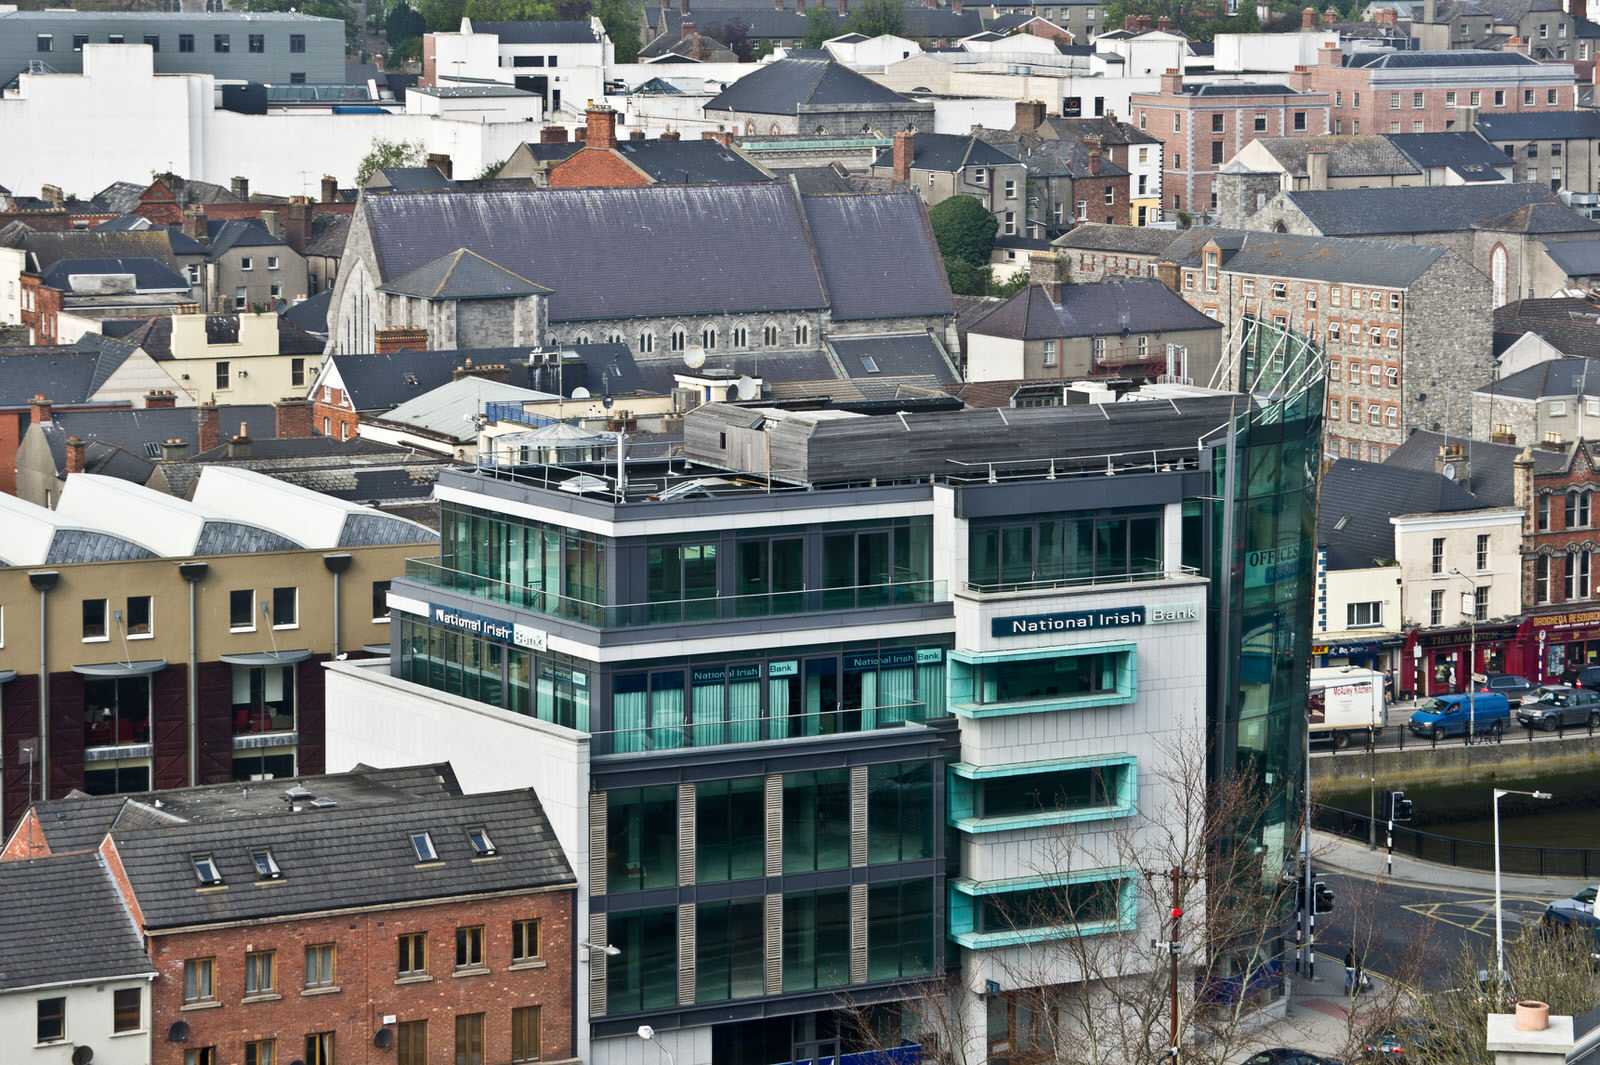 PANORAMIC VIEWS OF DROGHEDA AS IT WAS WAS IN 2011 [PRODUCED USING SONY NEX-5 PANORAMA MODE] 006